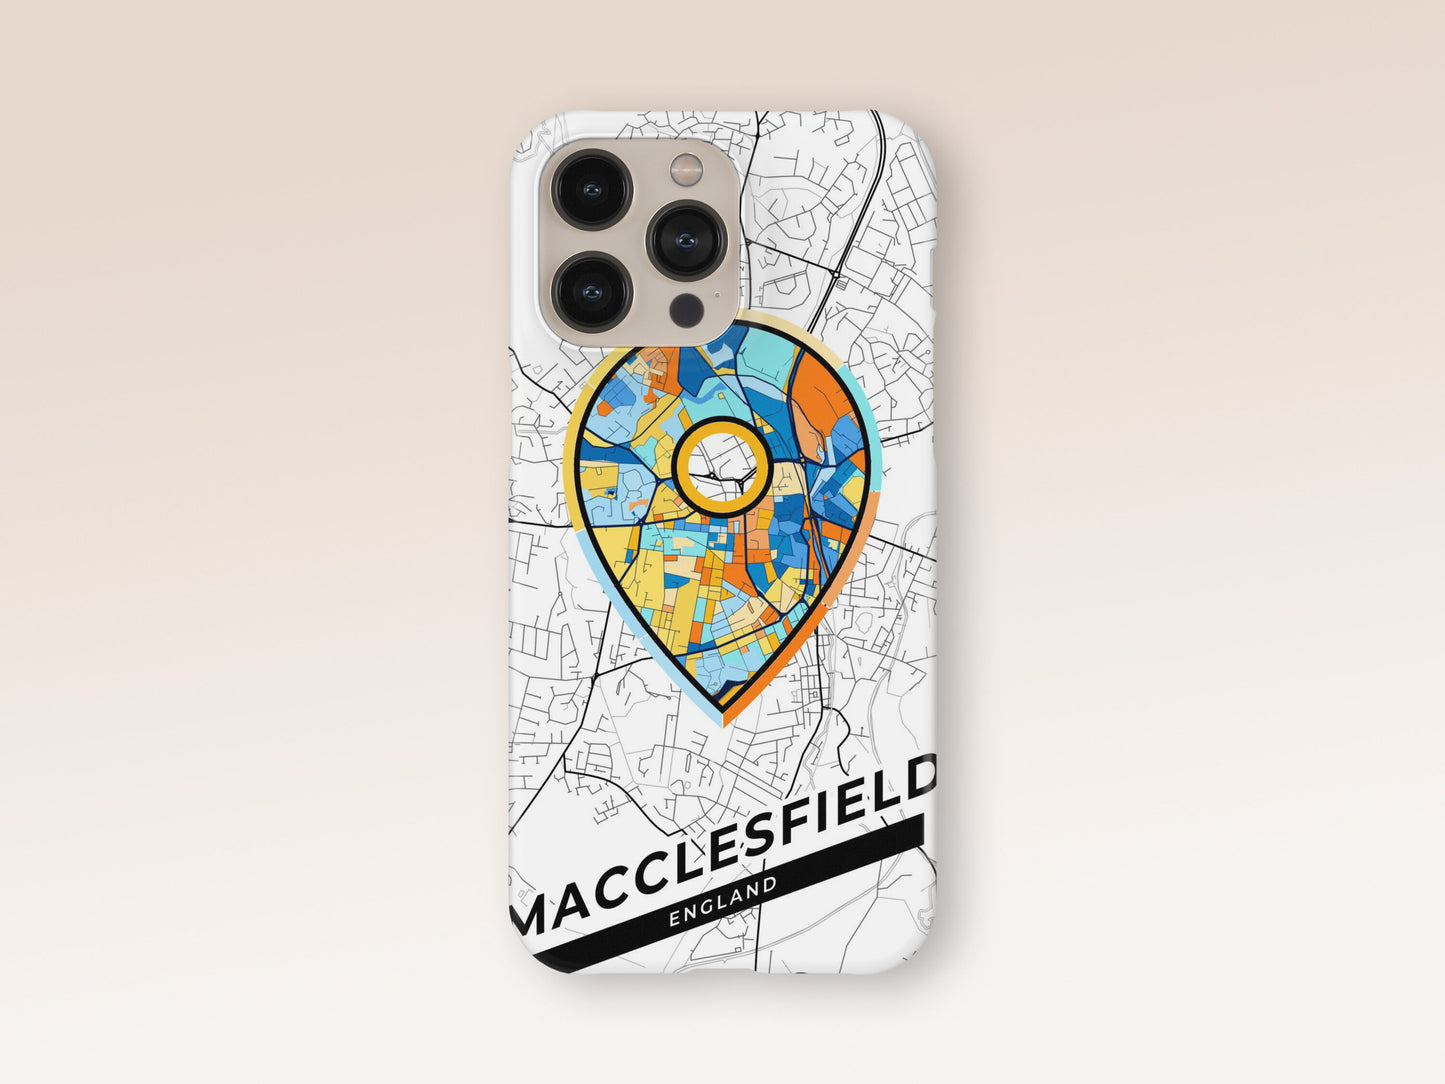 Macclesfield England slim phone case with colorful icon. Birthday, wedding or housewarming gift. Couple match cases. 1